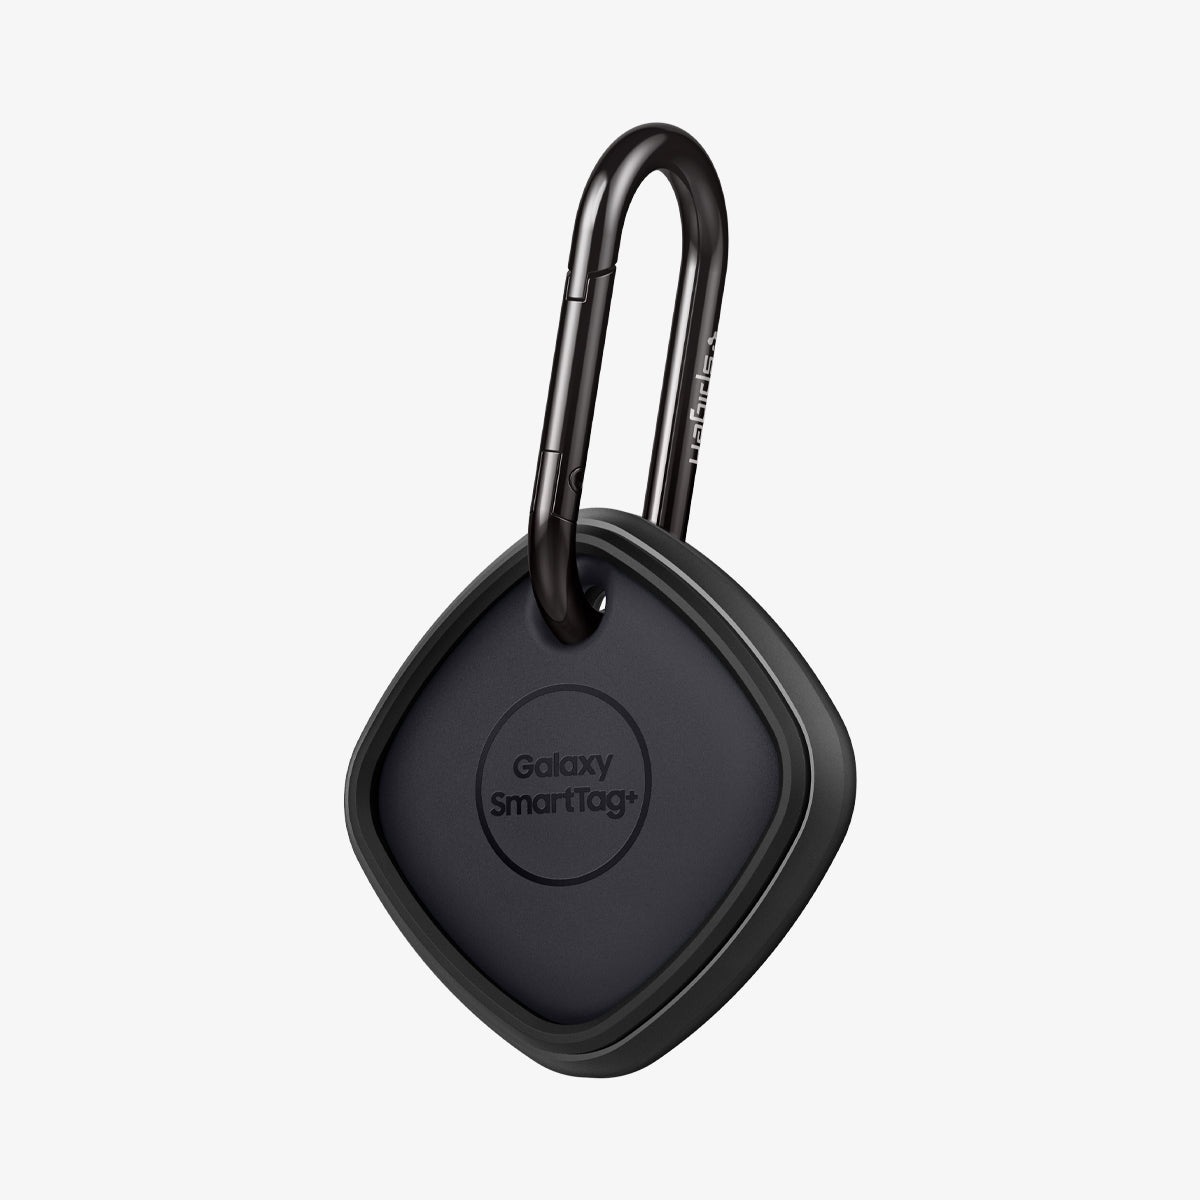 ACS03411 - Galaxy SmartTag+ Case Rugged Armor in matte black showing the front and partial side with carabiner